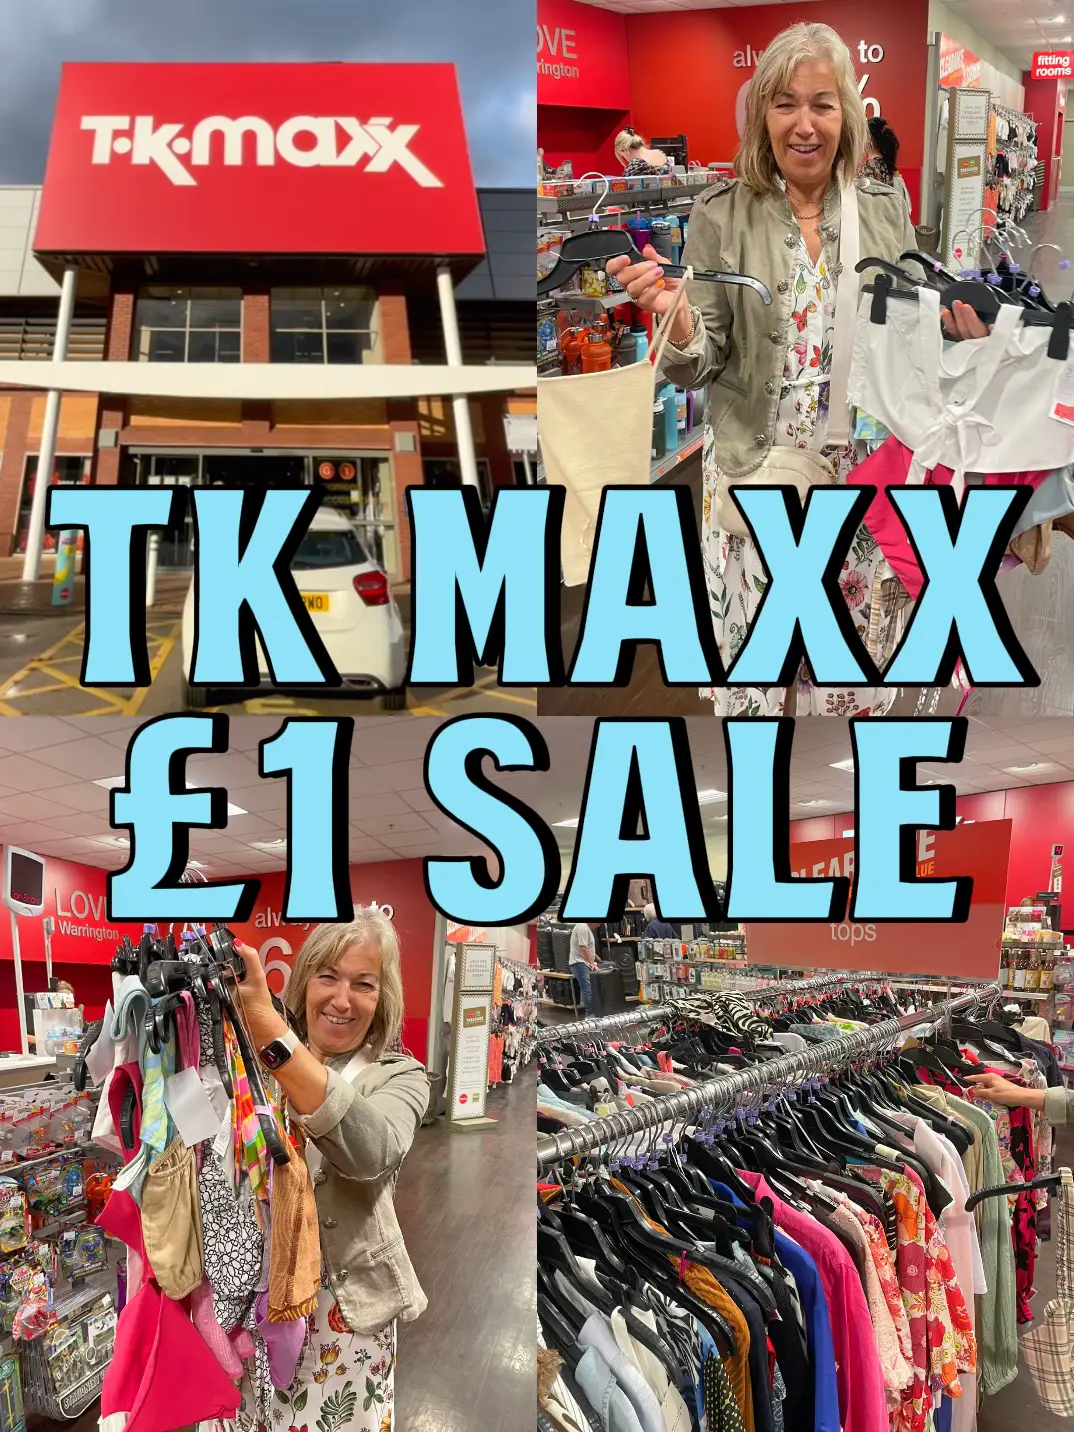 Shopping at TJ Maxx Vs. TX Maxx in the UK: Which Is Better?